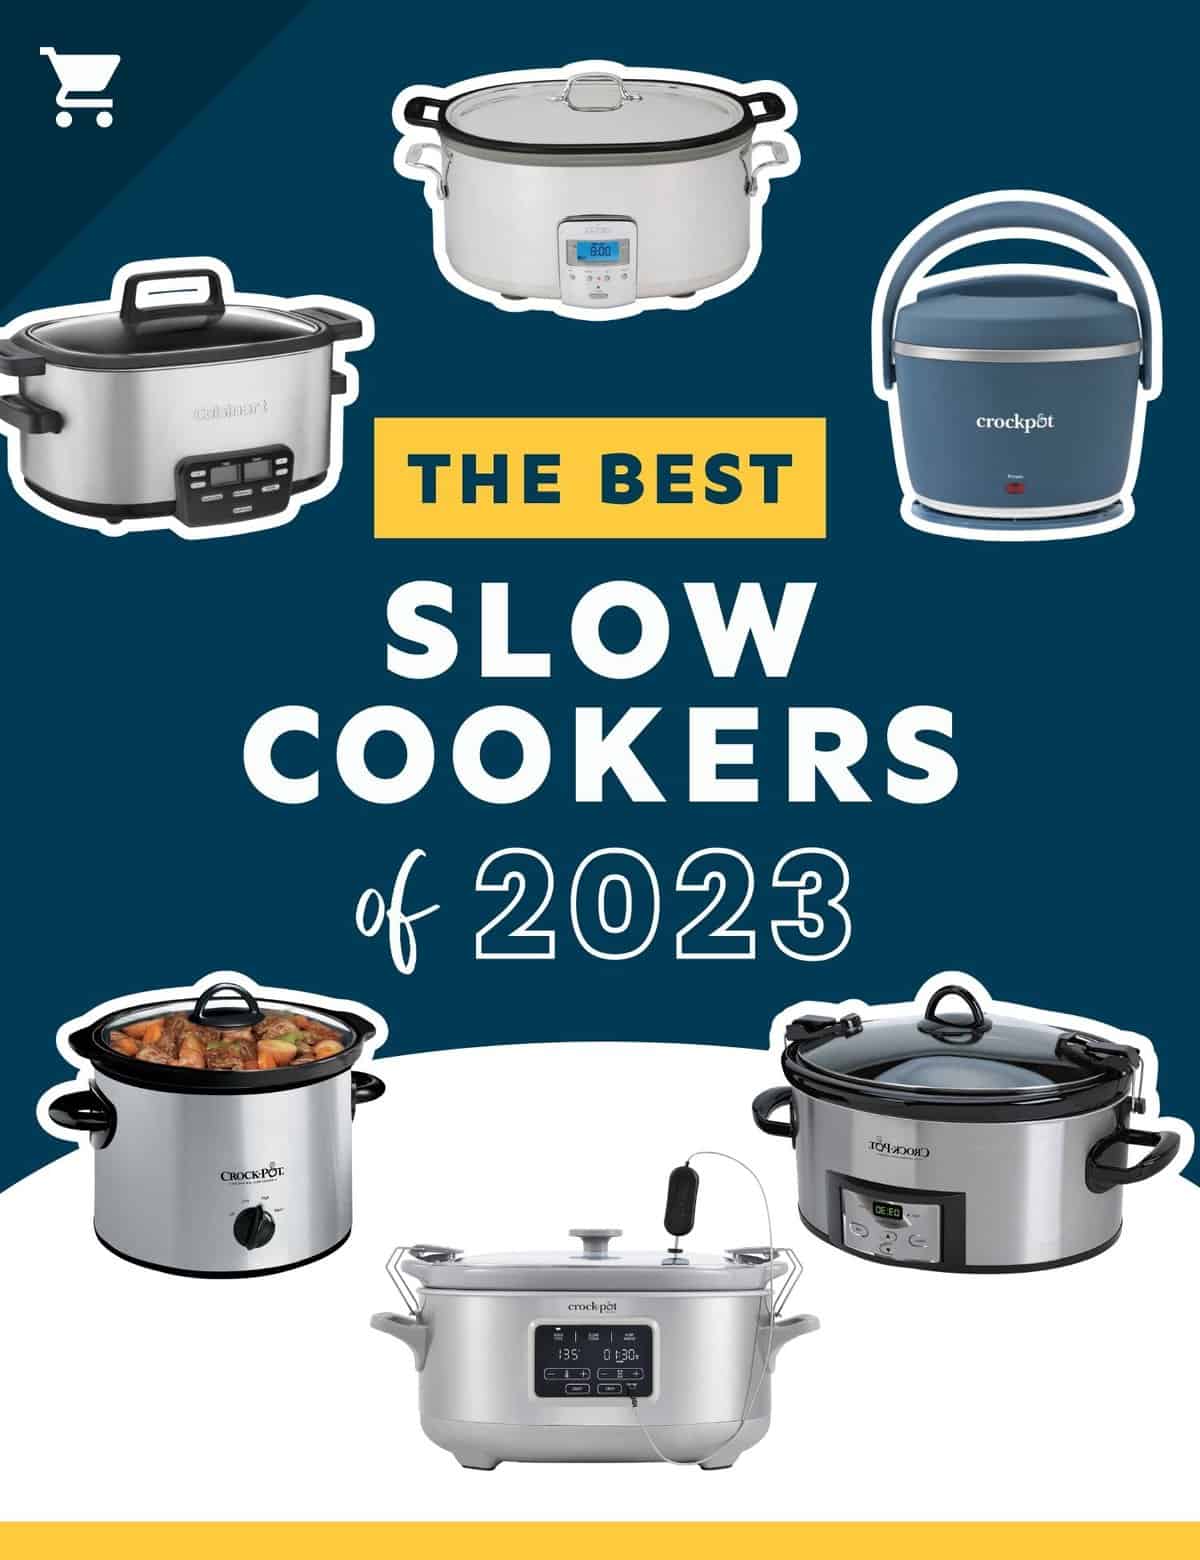 Crock-Pot Slow Cooker with Sous Vide Review: Perfect for Weeknight Dinners